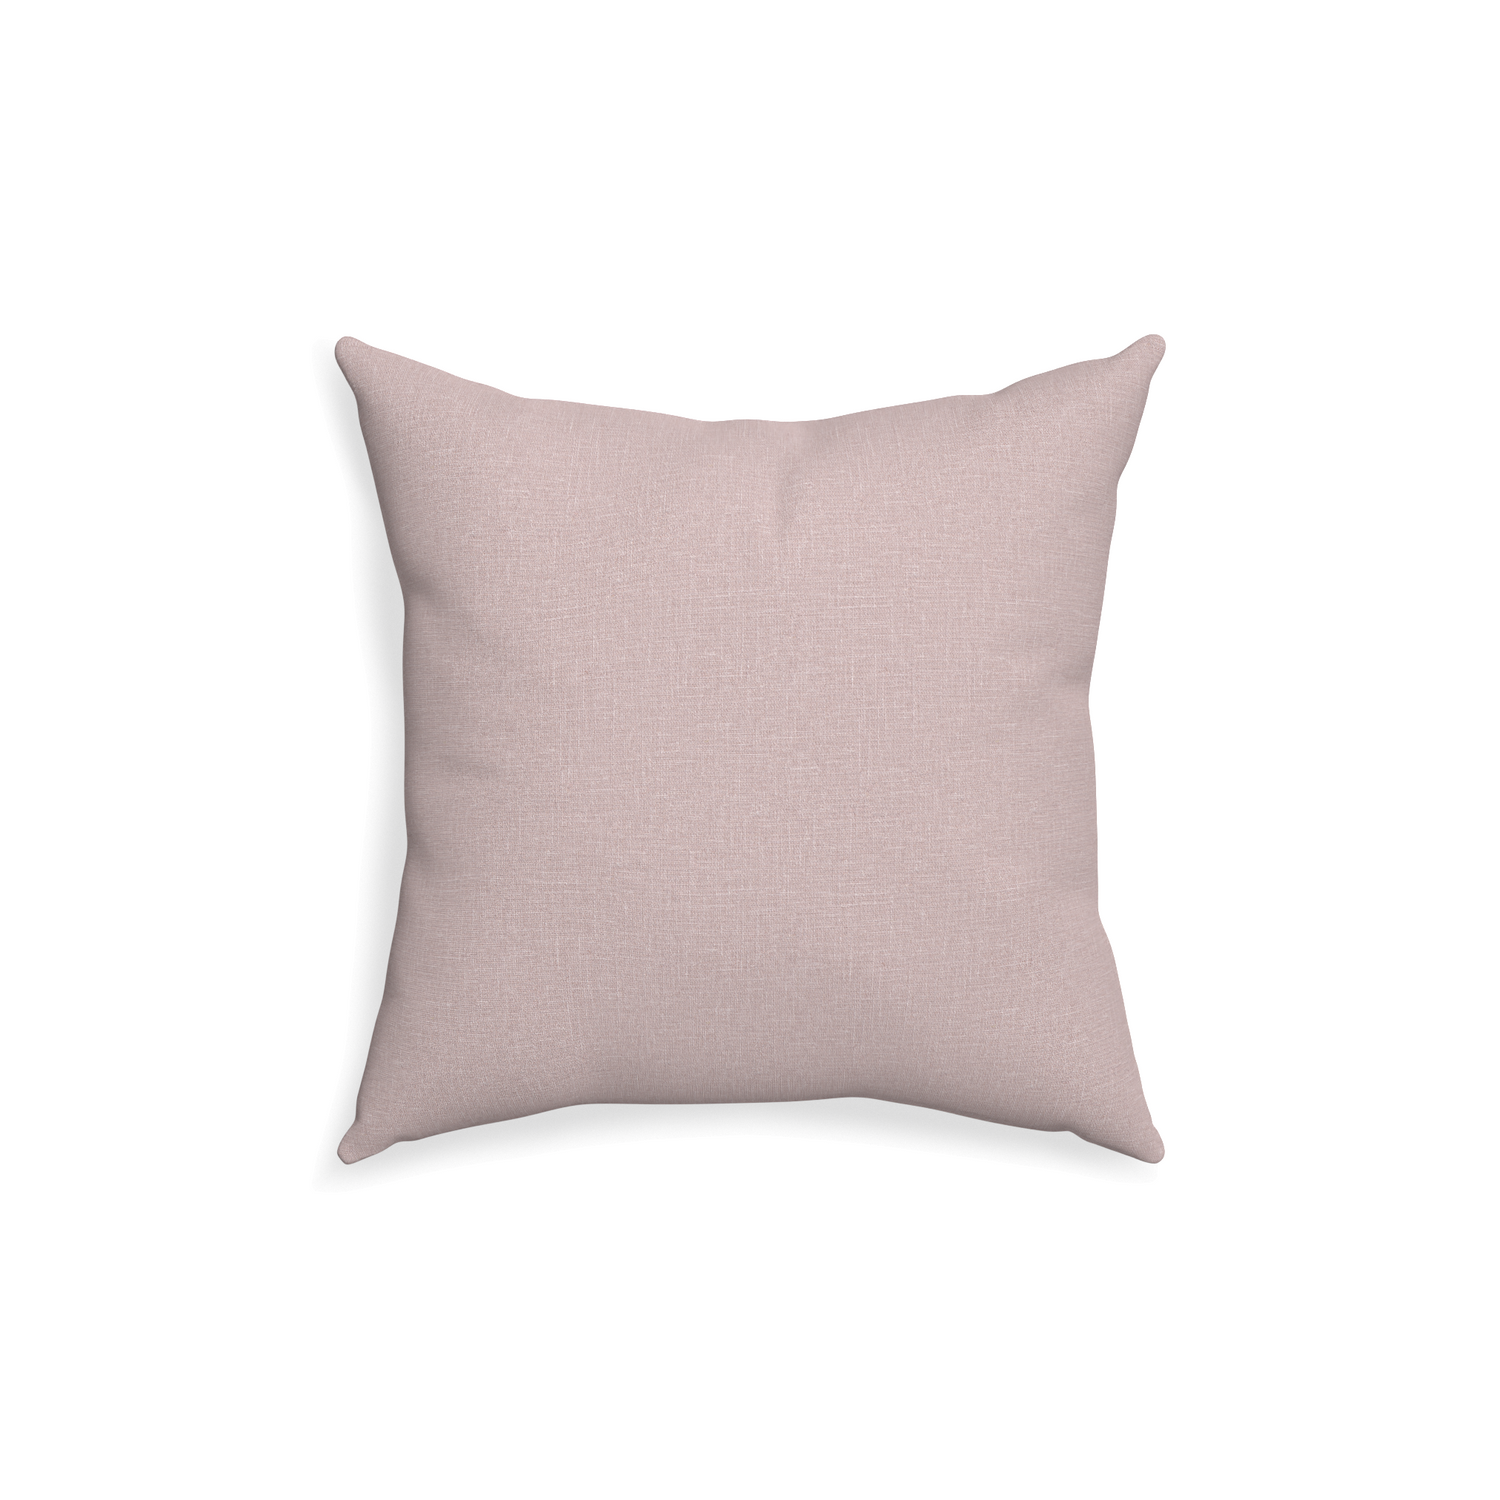 18-square orchid custom mauve pinkpillow with none on white background